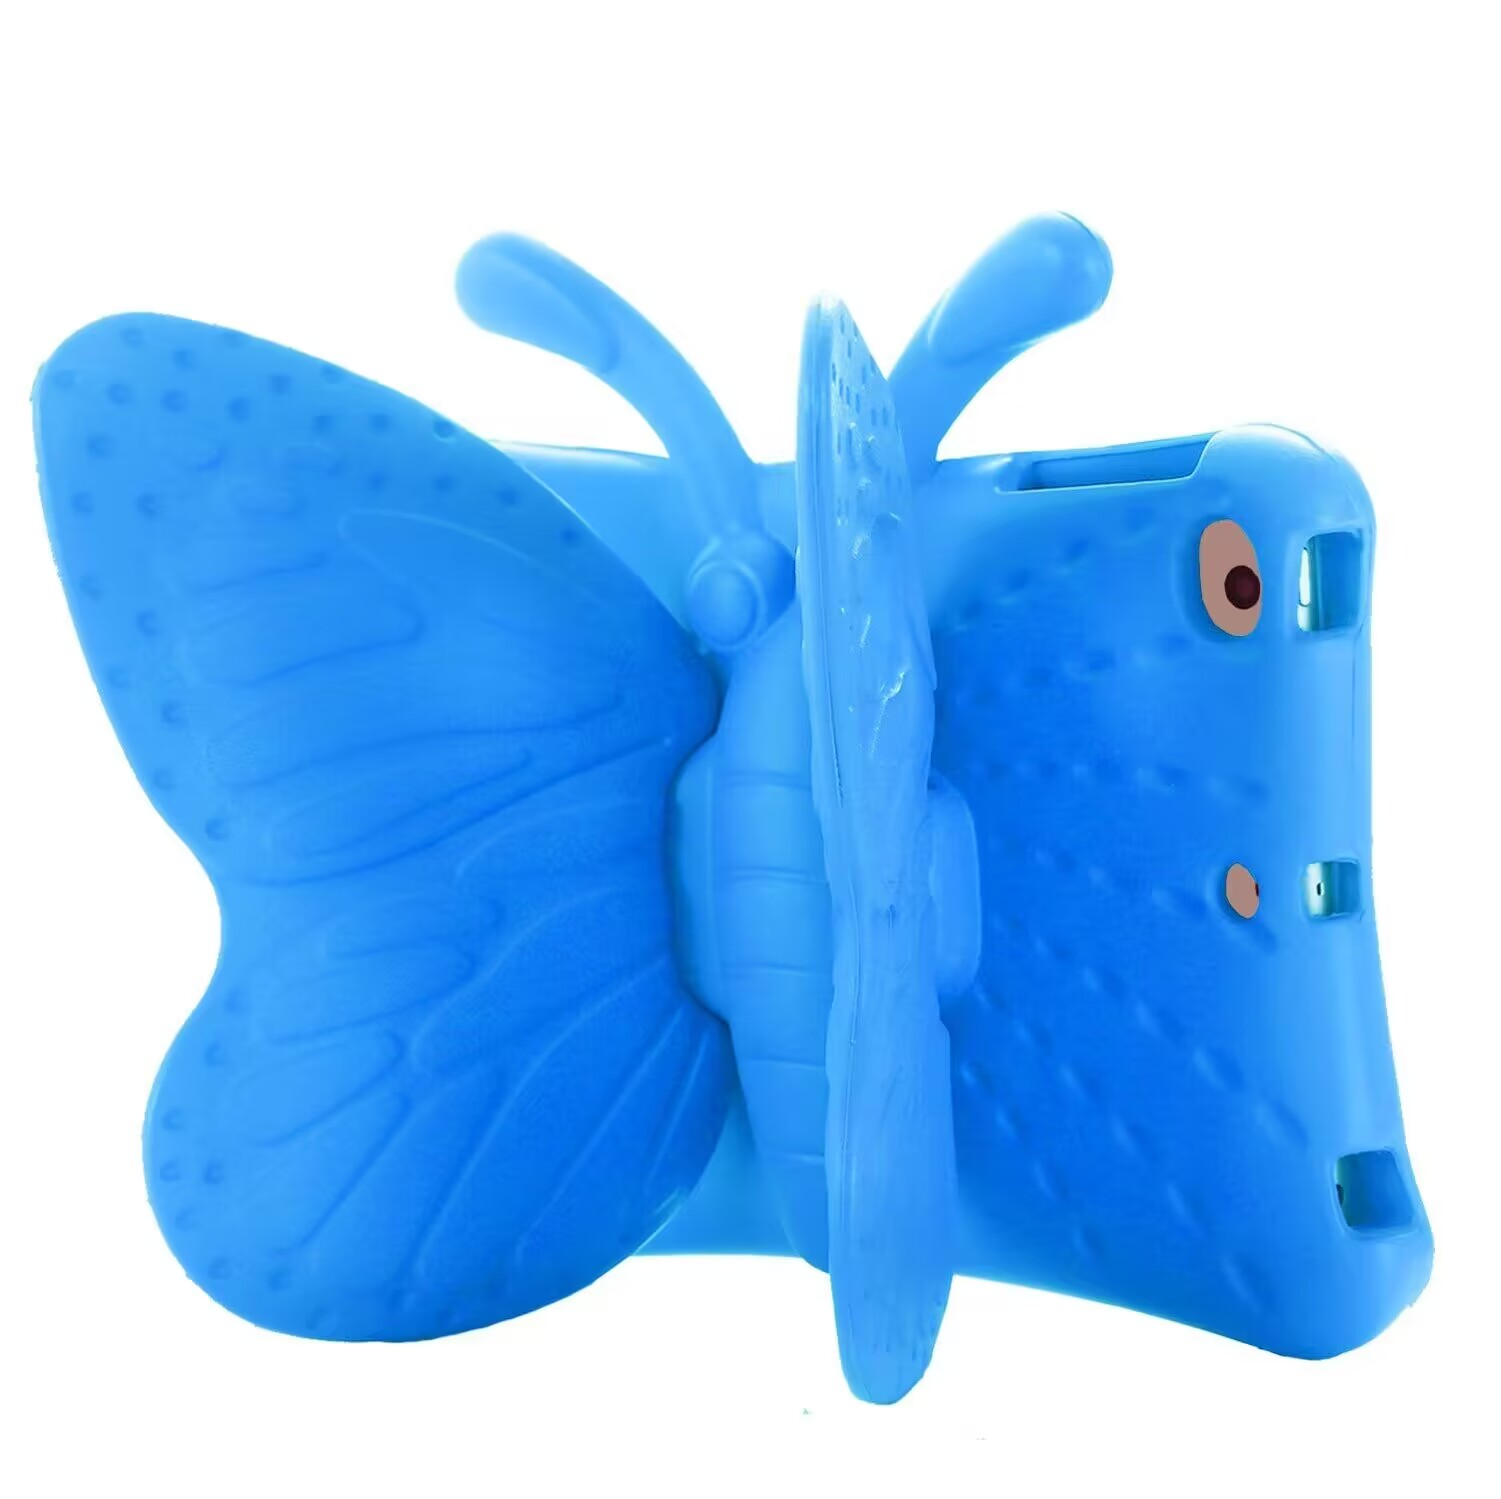 Butterfly cover til iPad Mini 1/2/3/4/5, (7,9